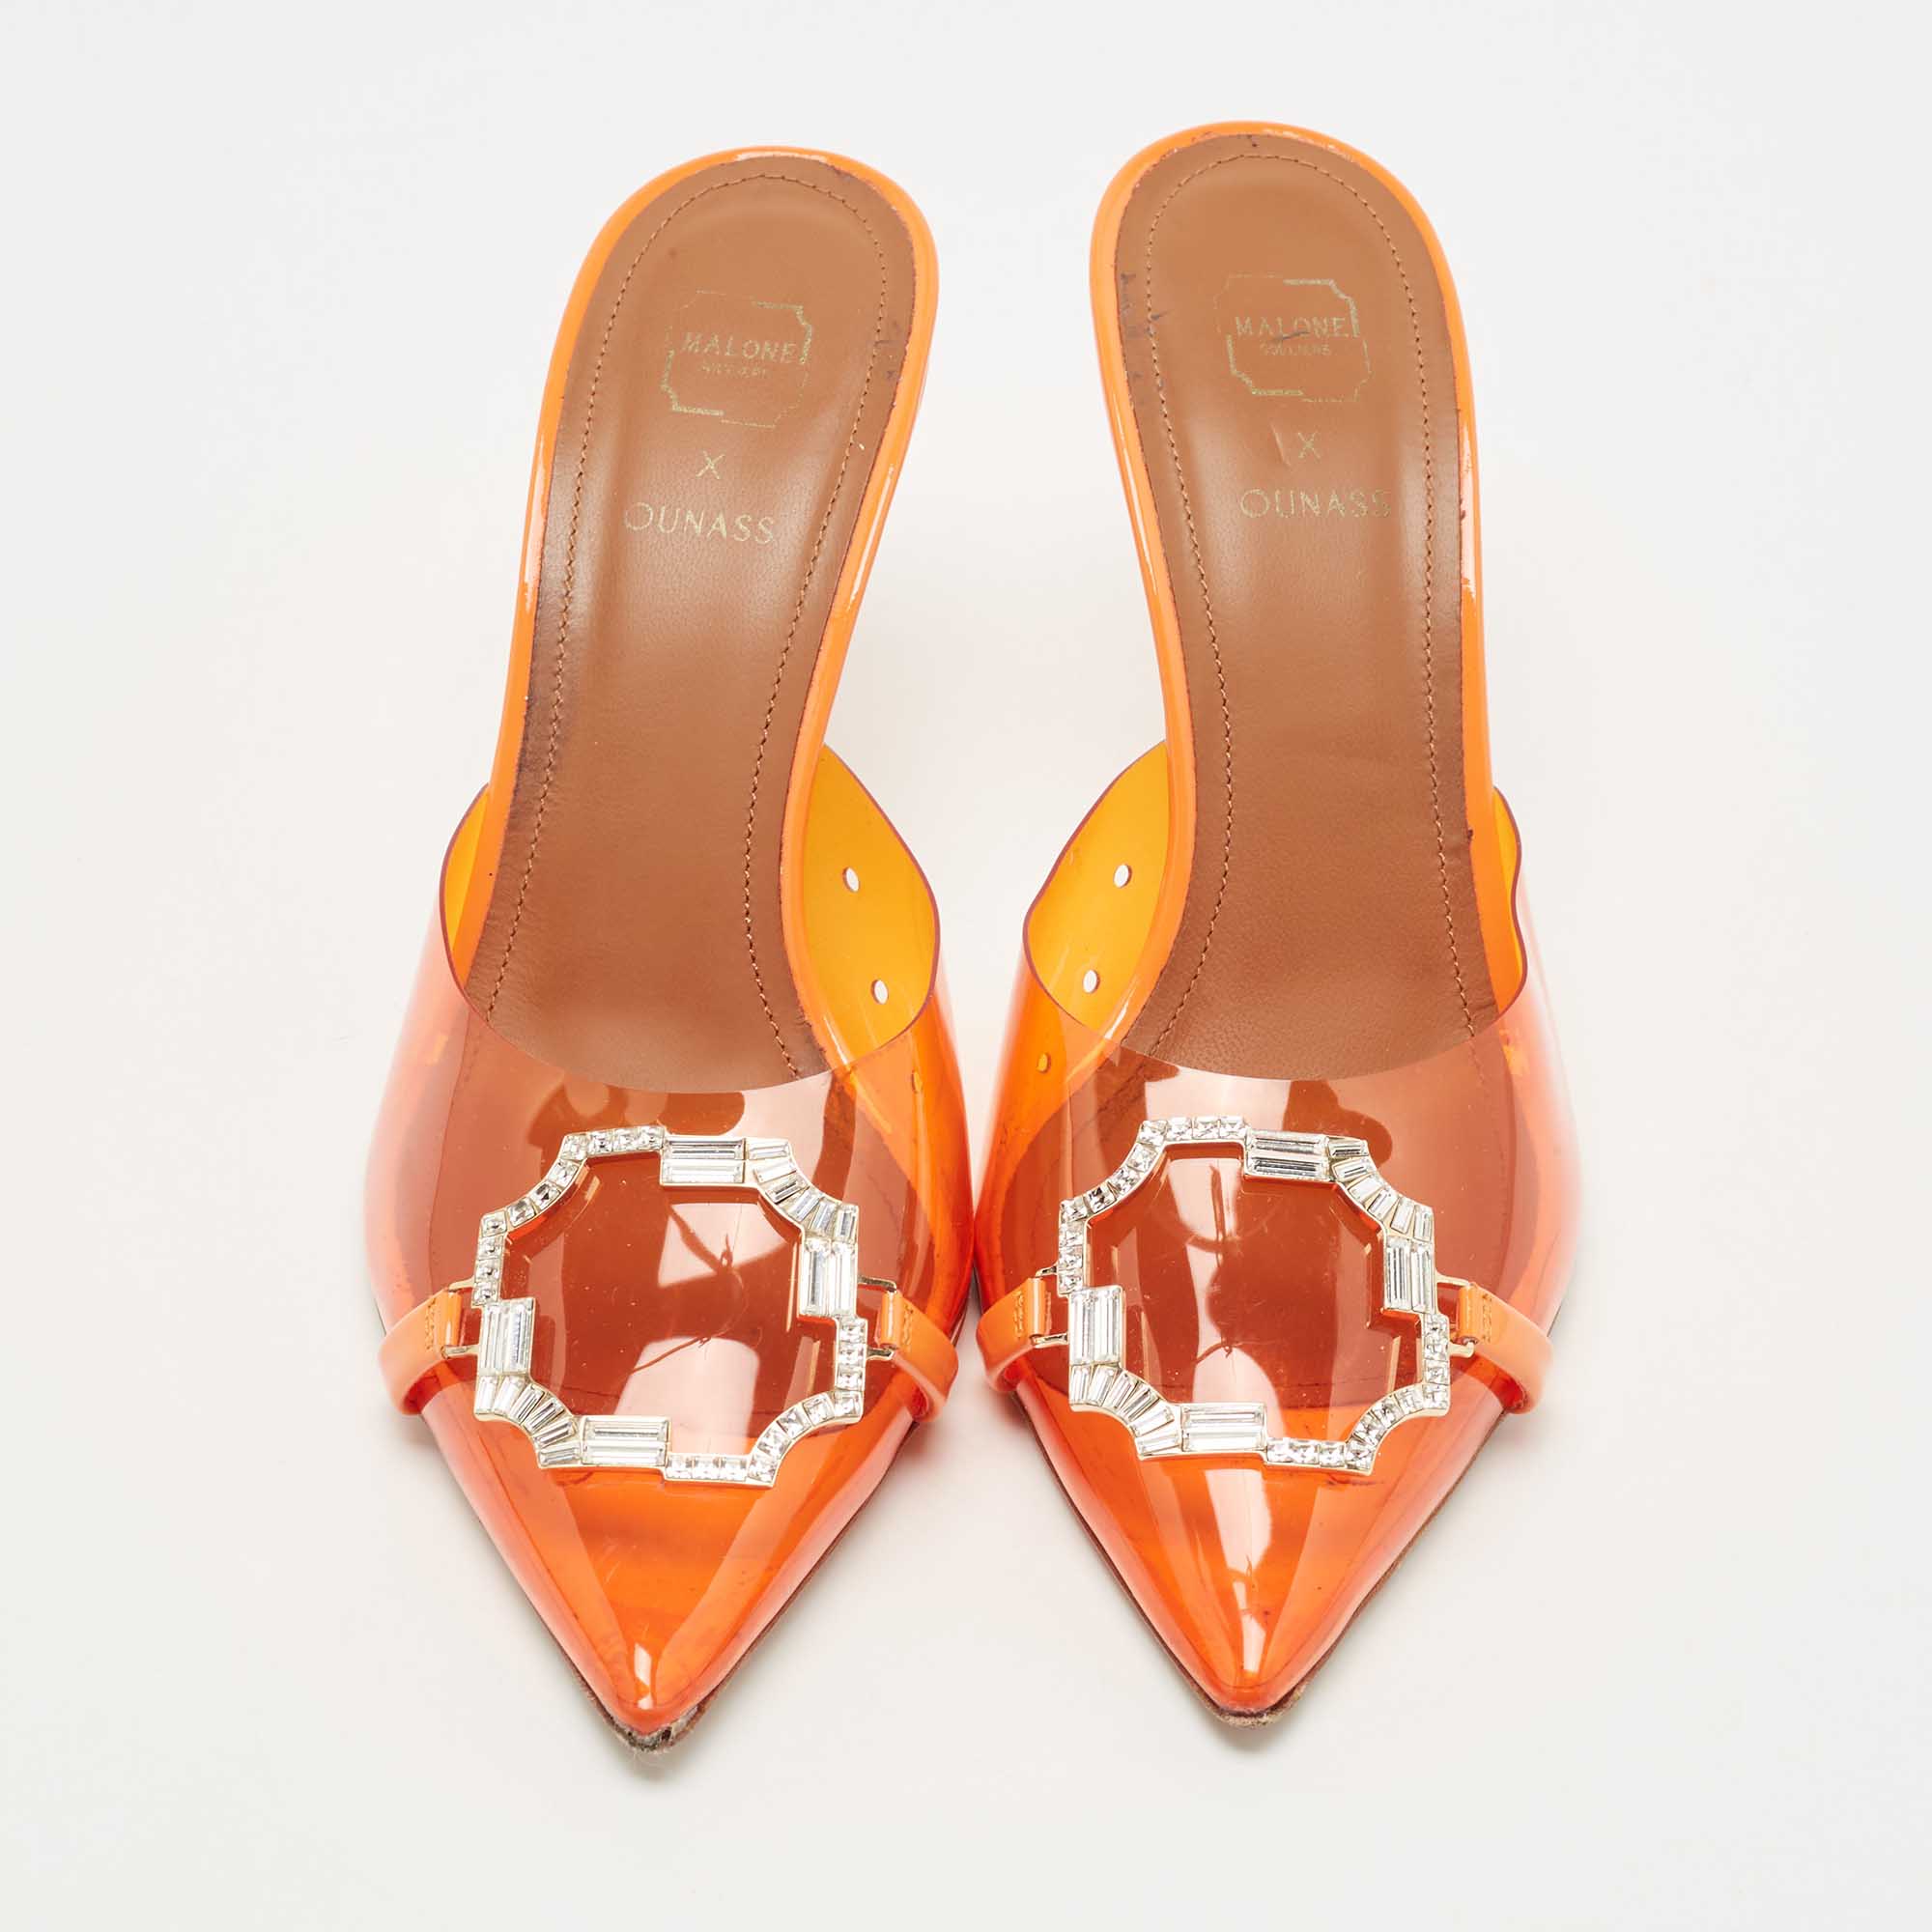 Malone Souliers Orange PVC Missy  Pointed Toe Sandals Size 38.5